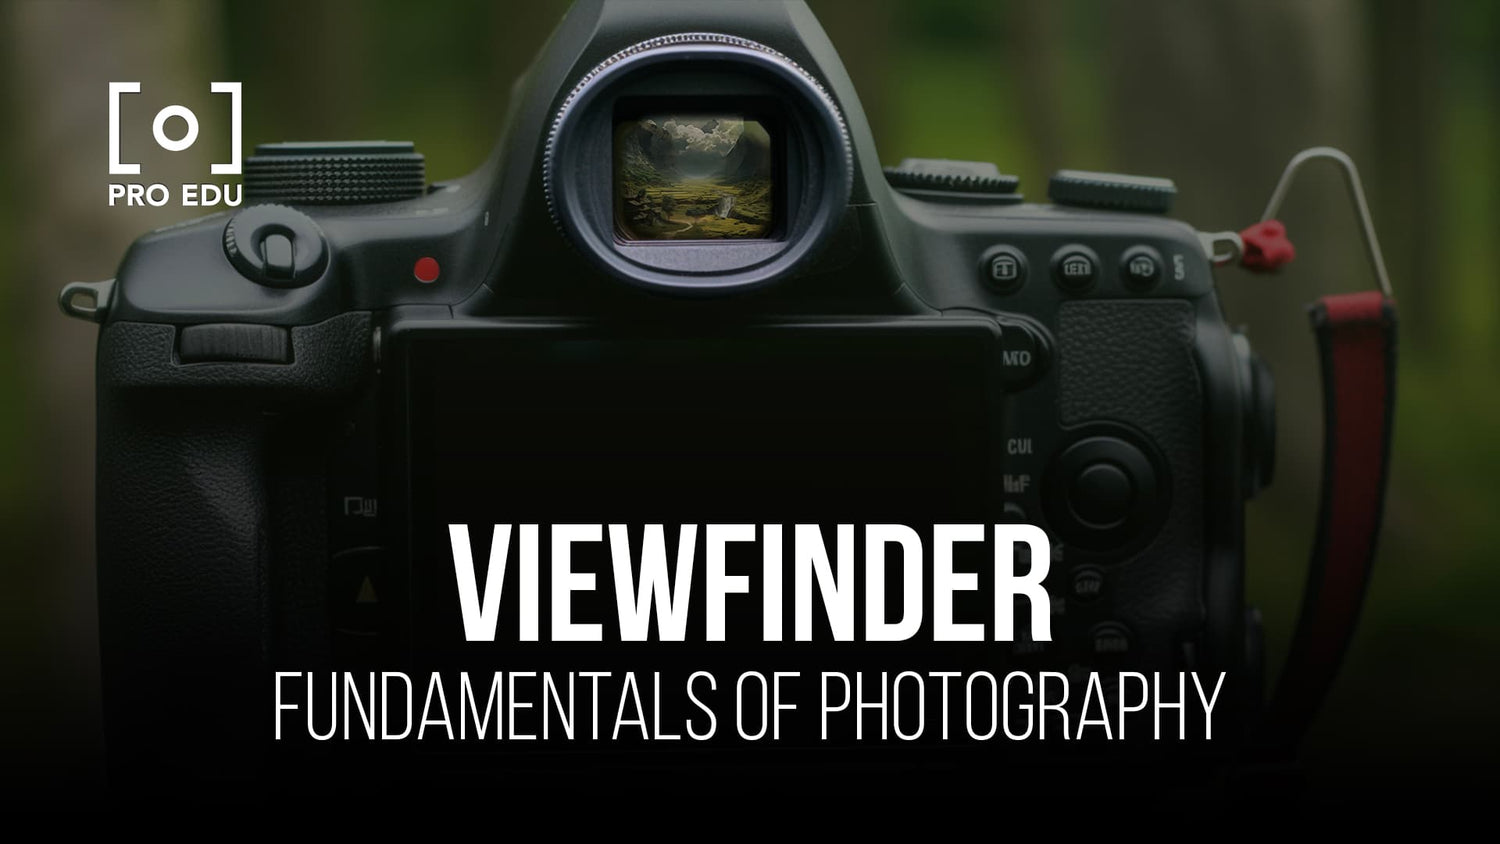 A photographer's guide to mastering the viewfinder for optimal composition